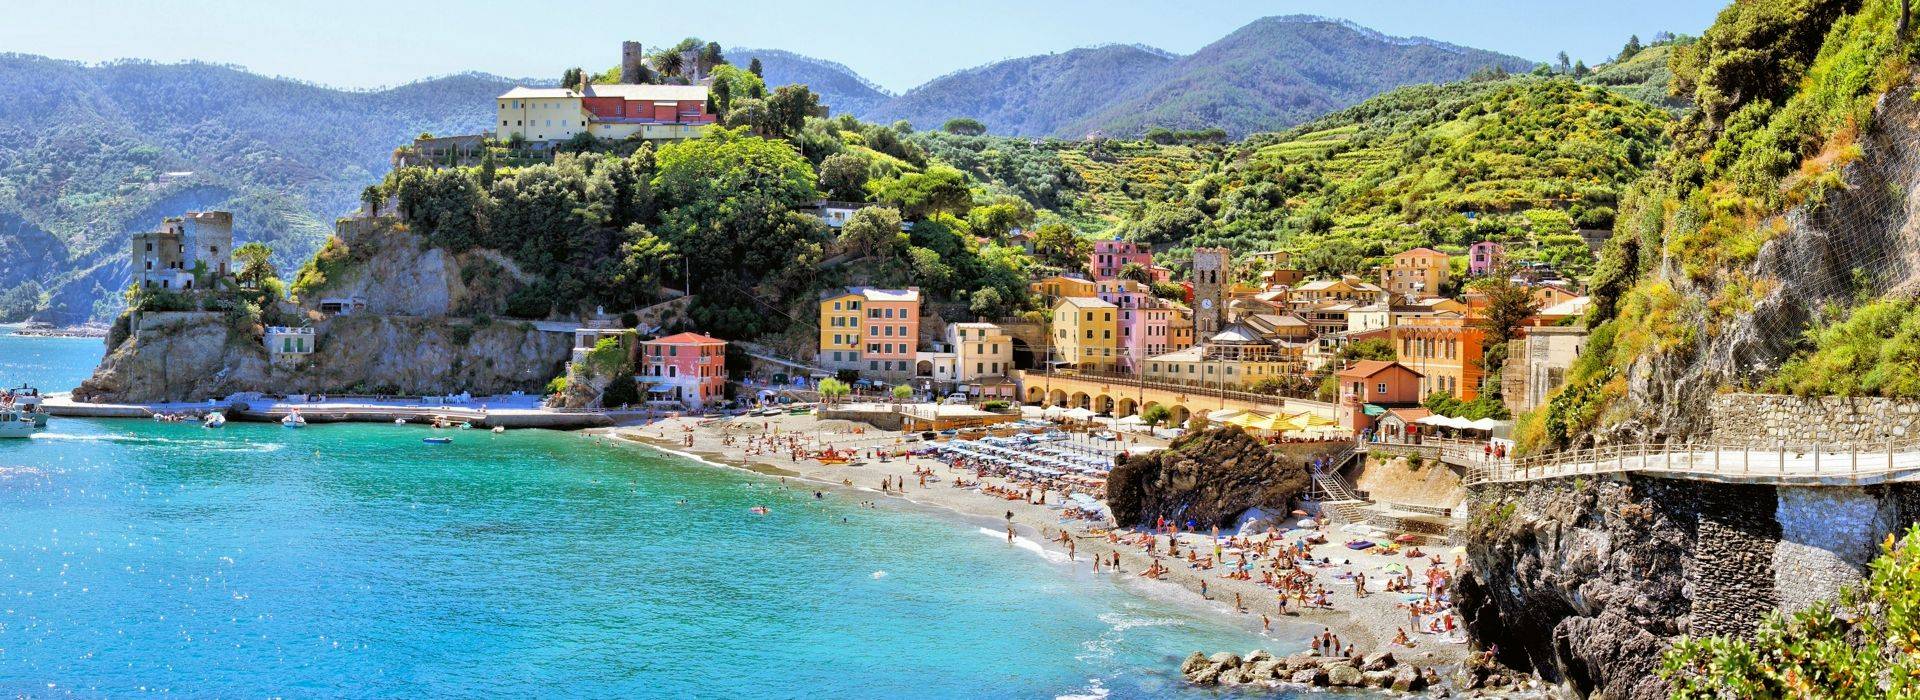 Italyscape-Walking Cinque Terre and Tuscany-Monterosso.jpeg